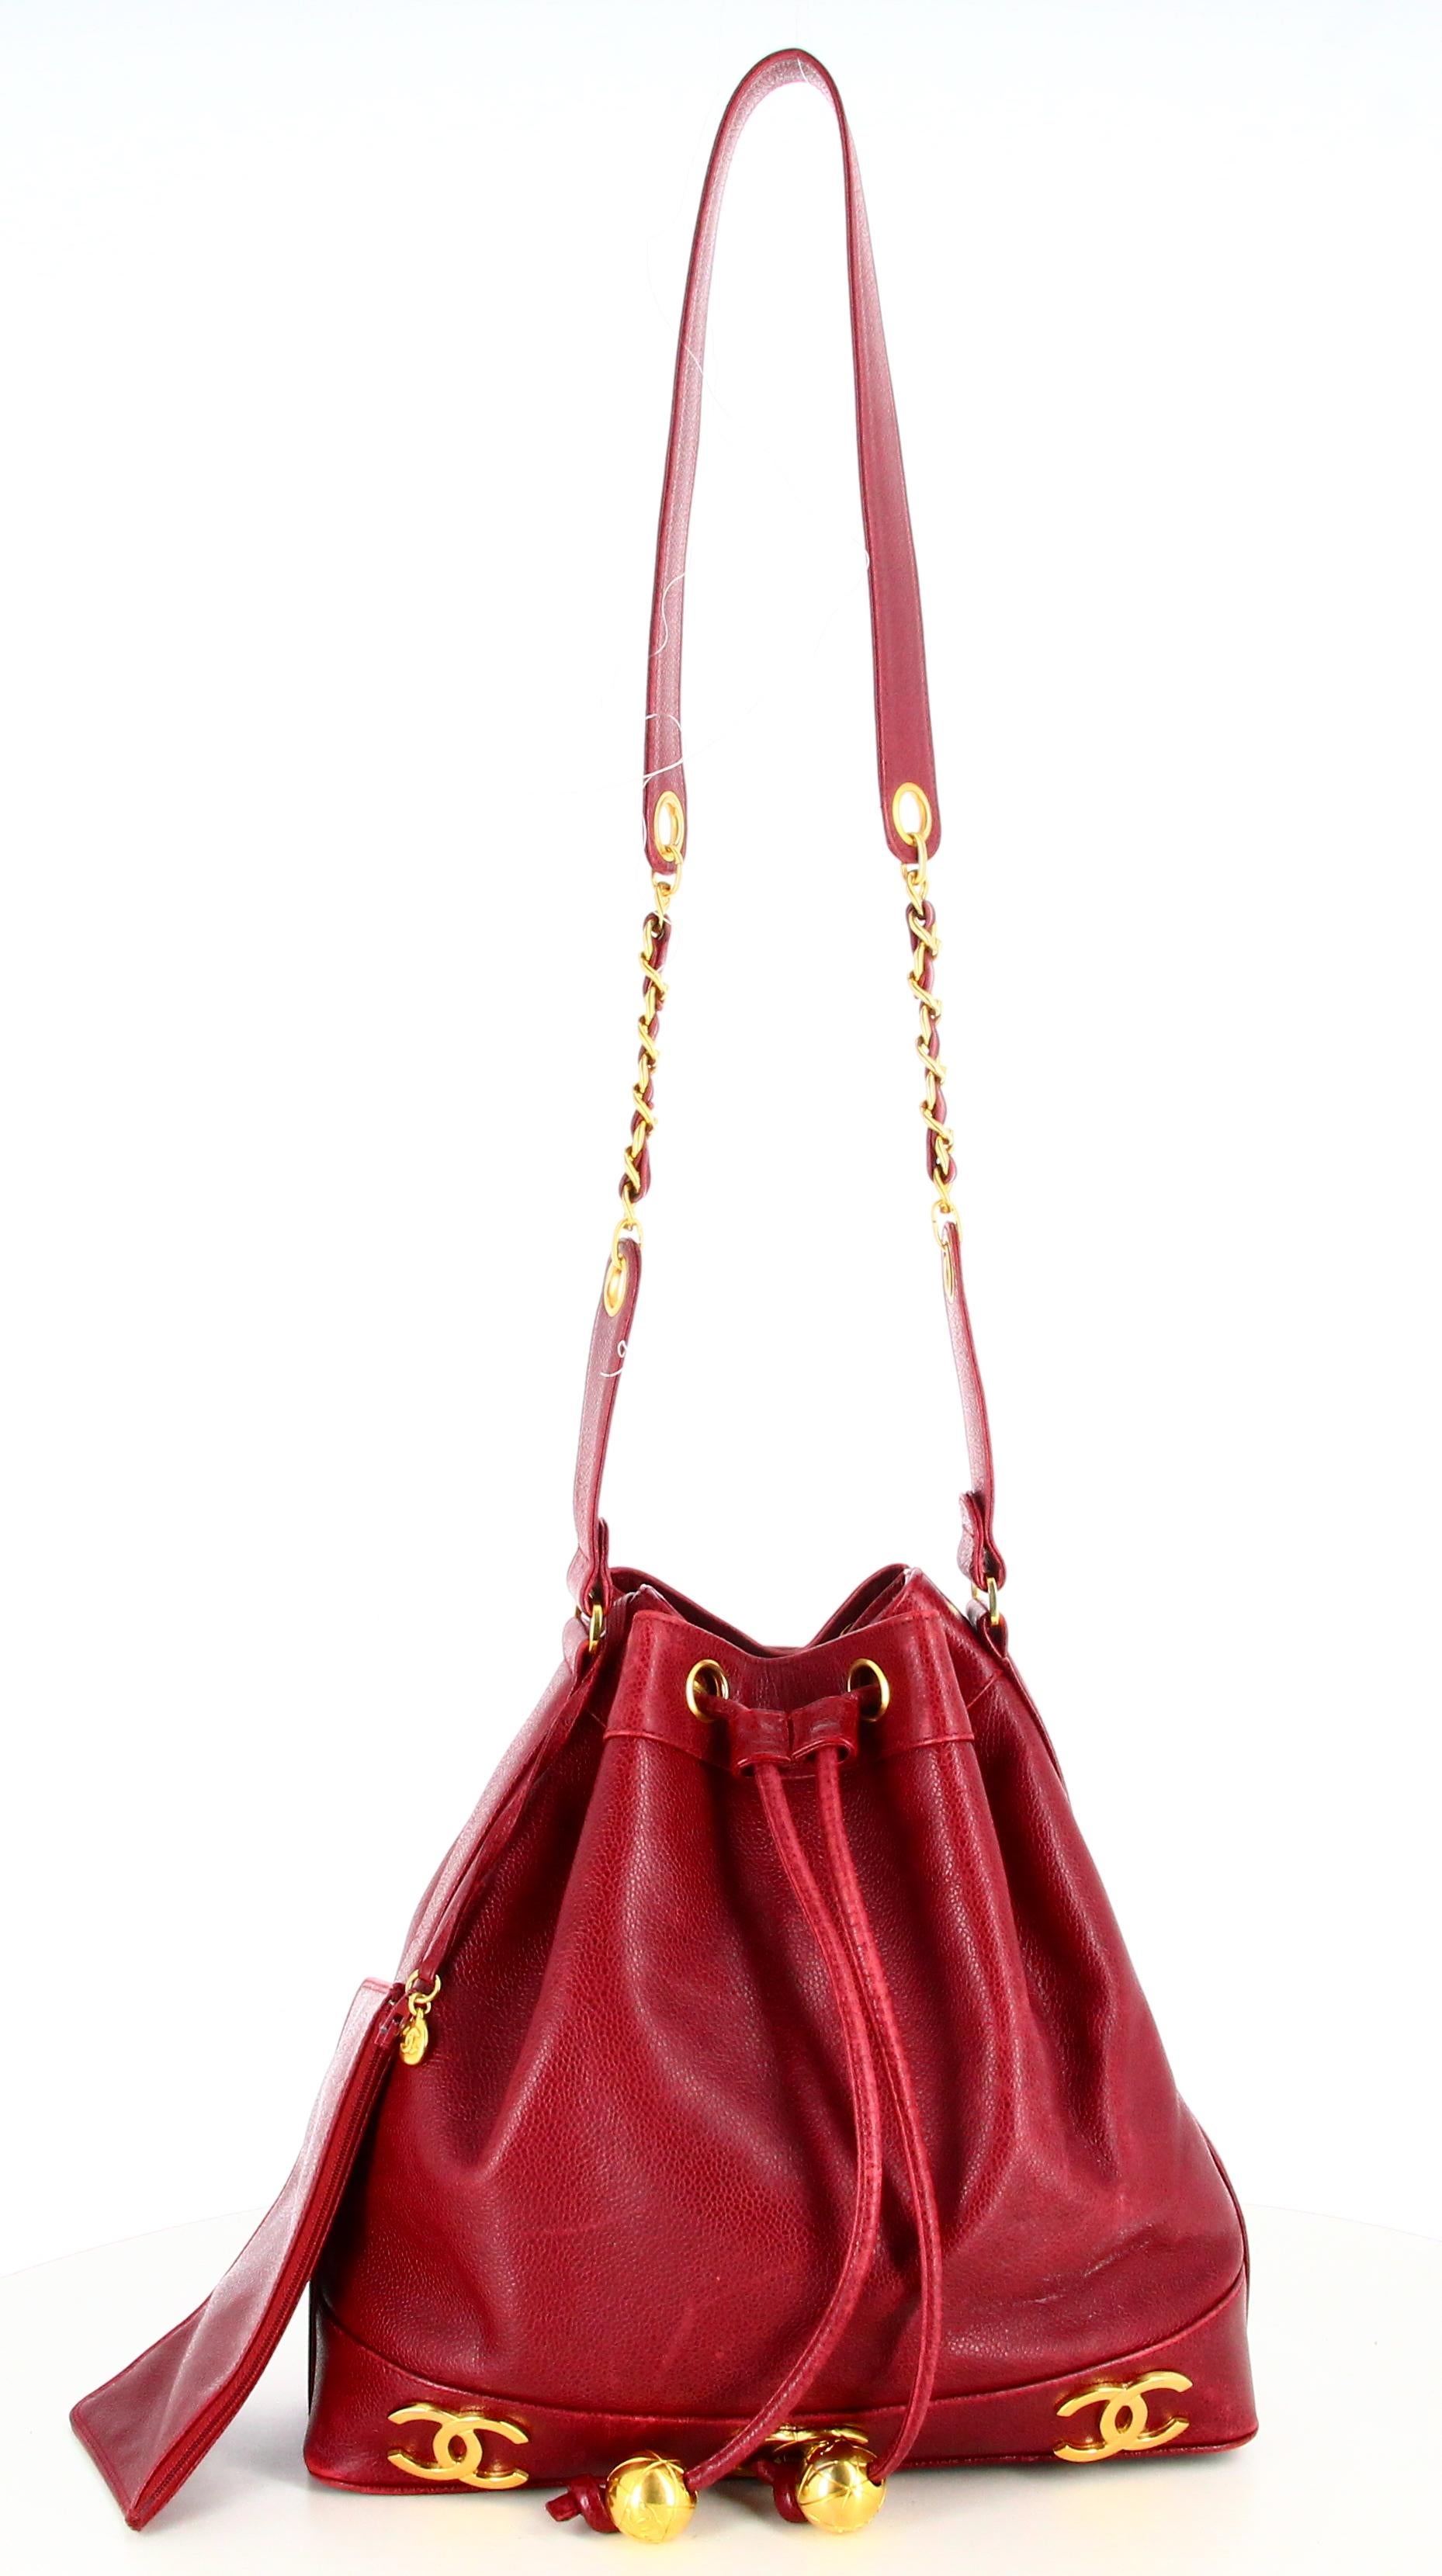 Chanel Burgundy Lambskin Bucket Bag

- Good condition. Shows signs of wear over time. 
- Chanel Bucket Bag 
- Burgundy lamb leather
- Leather lace 
- Chanel golden double C logo 
- Leather shoulder strap and golden chain 
- Interior: Burgundy